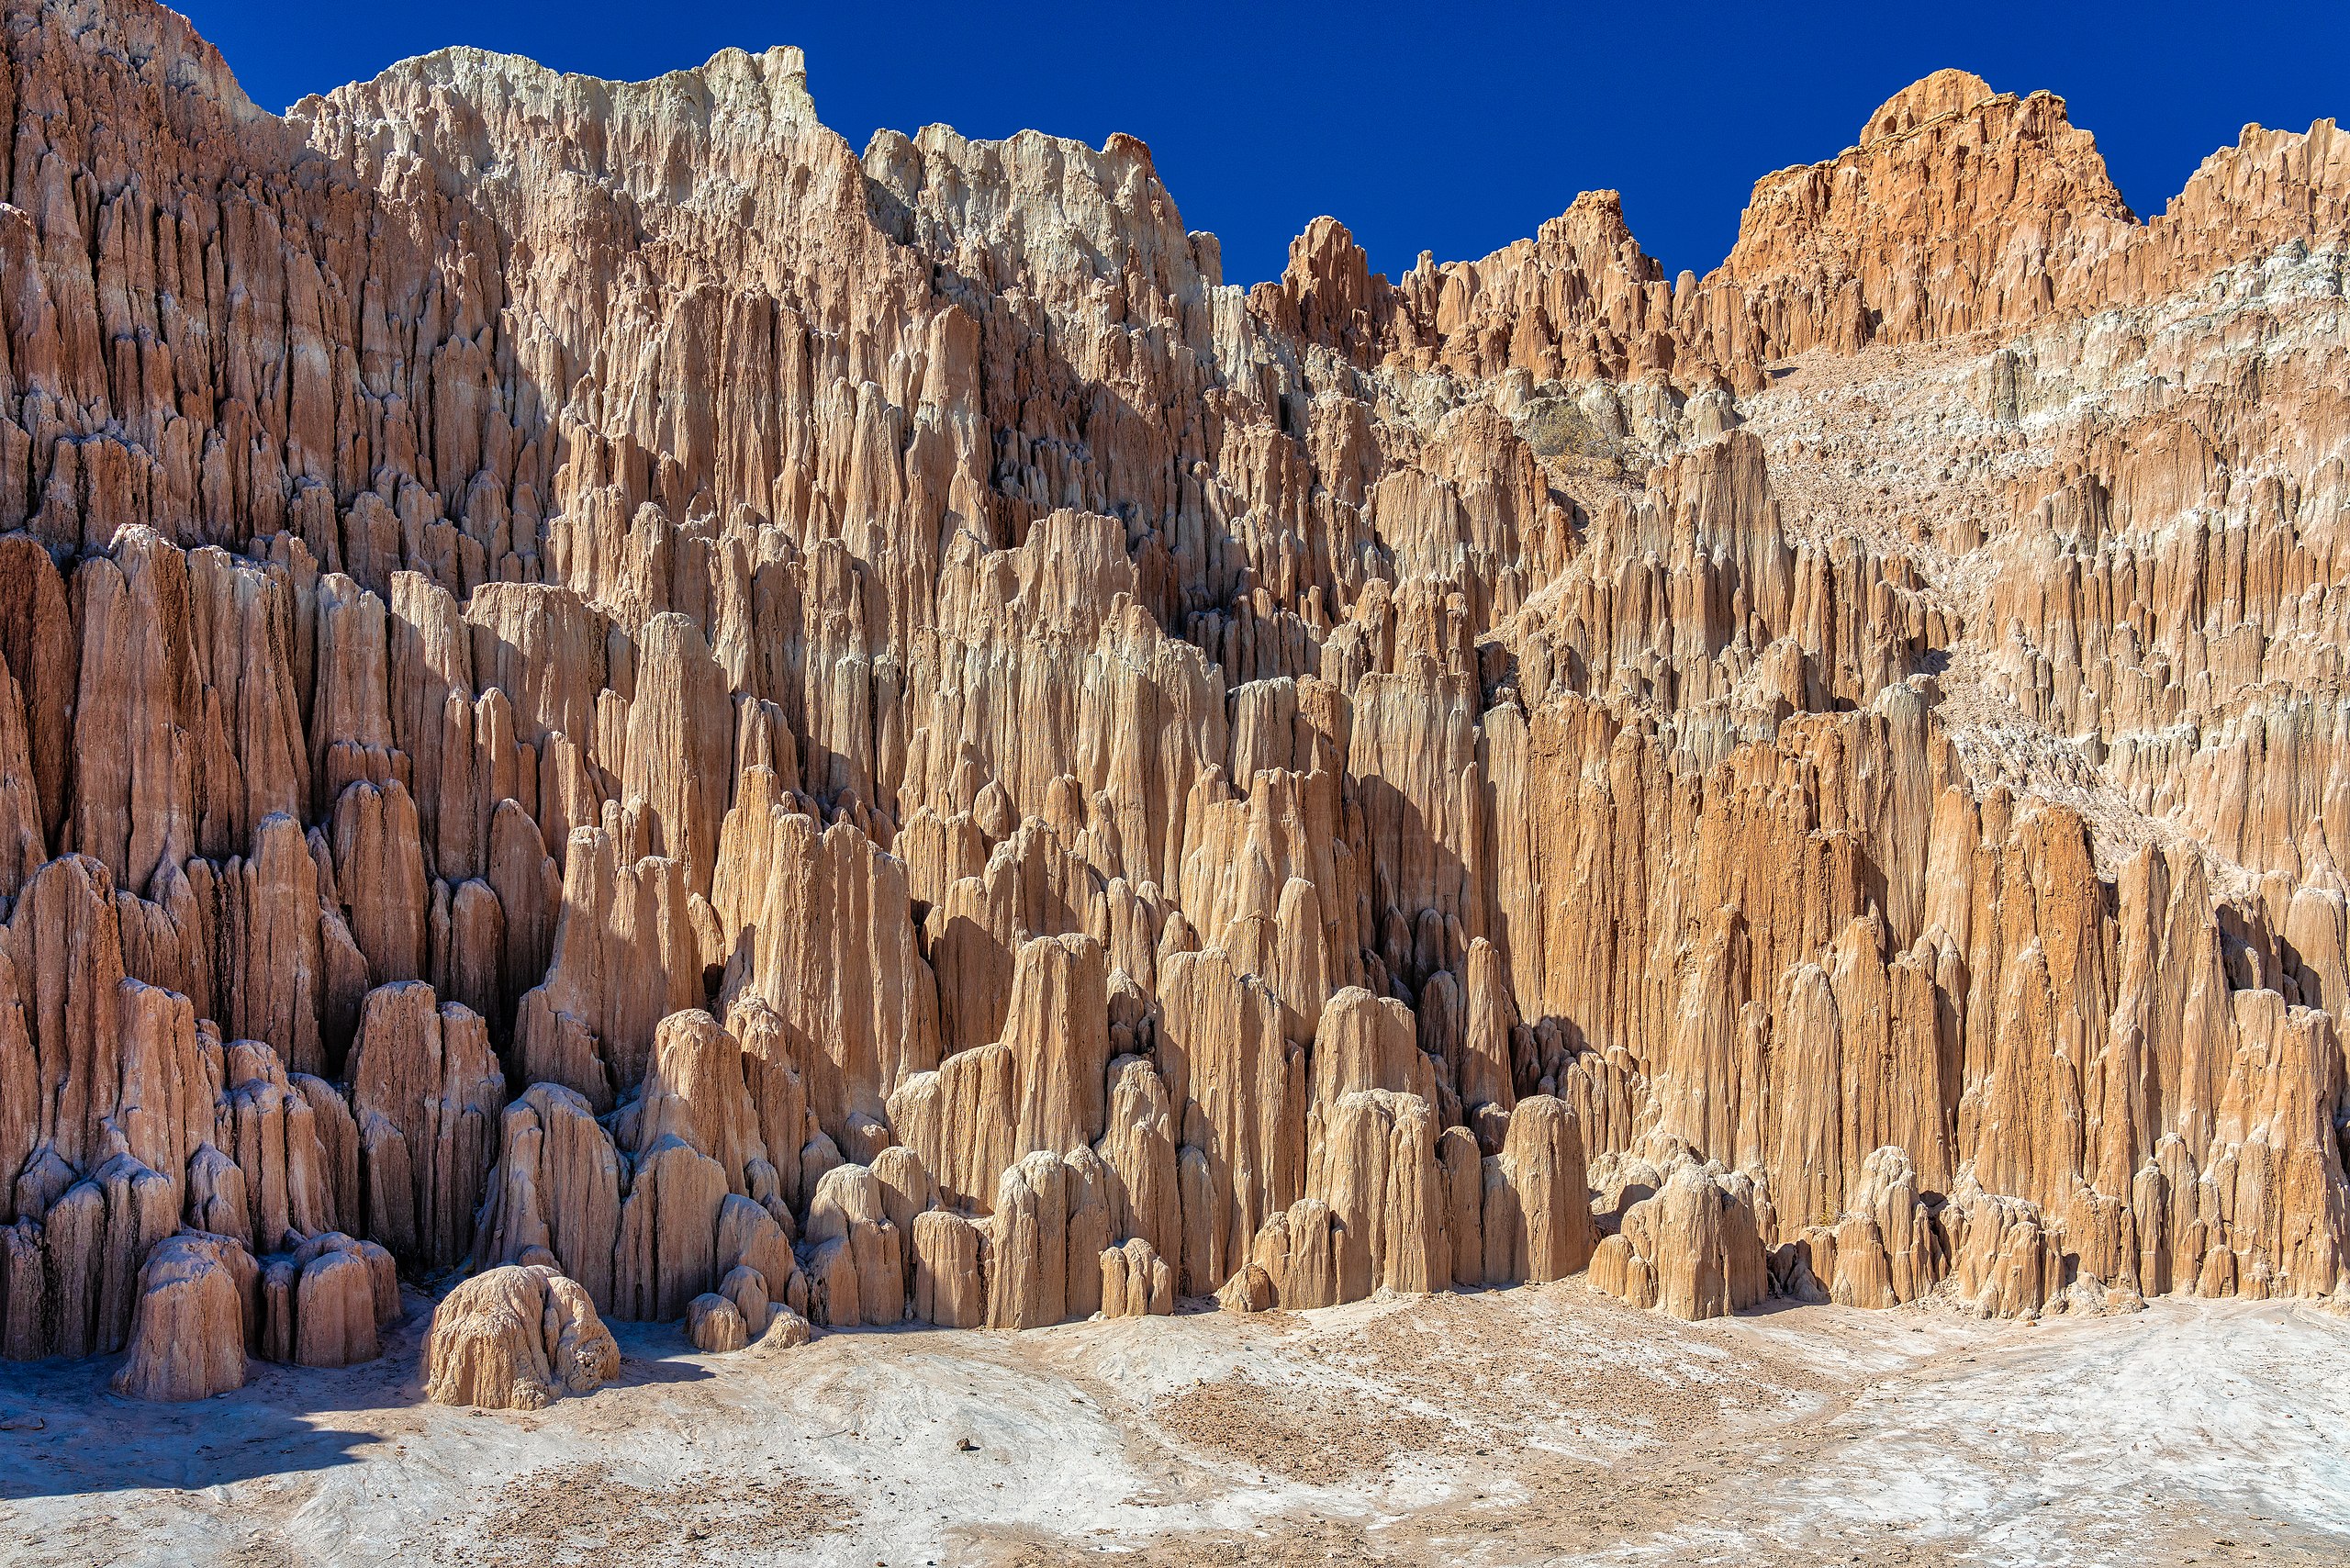 File:Cathedral Gorge State Park, NV (49623743866).jpg - Wikimedia Commons